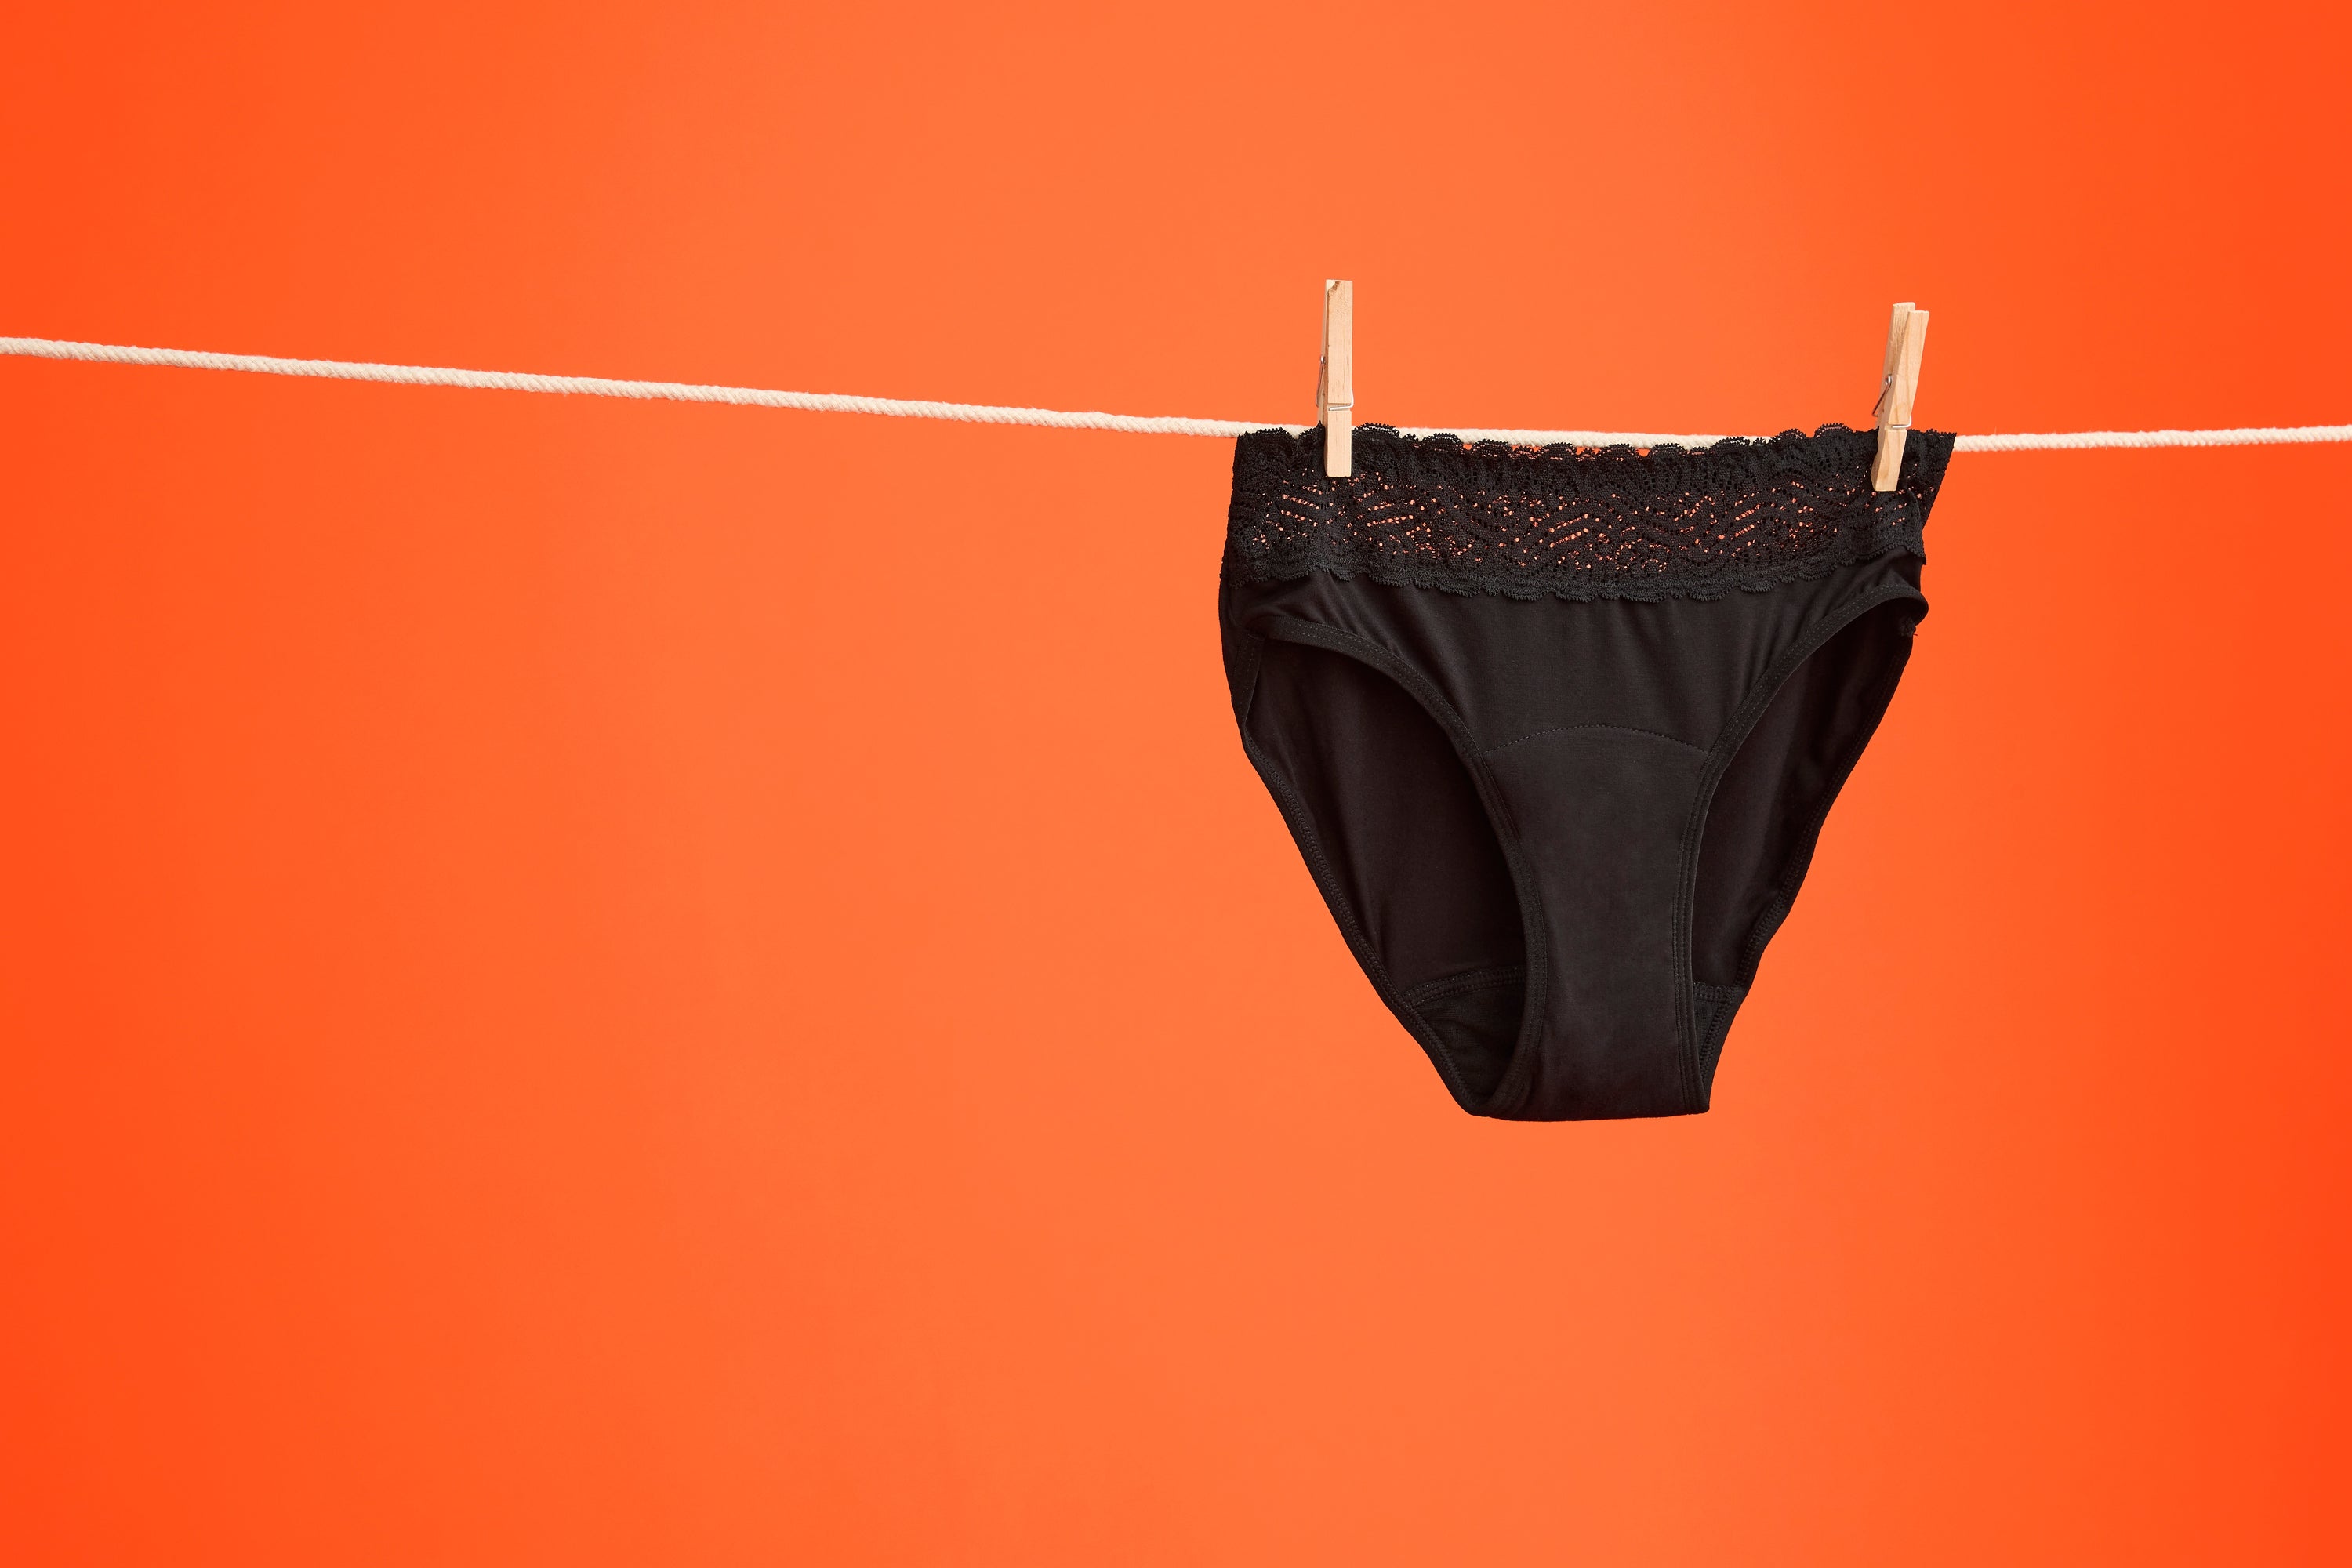 MODIBODI PERIOD UNDIES. I TRIED THEM. AND HERE'S WHAT HAPPENED